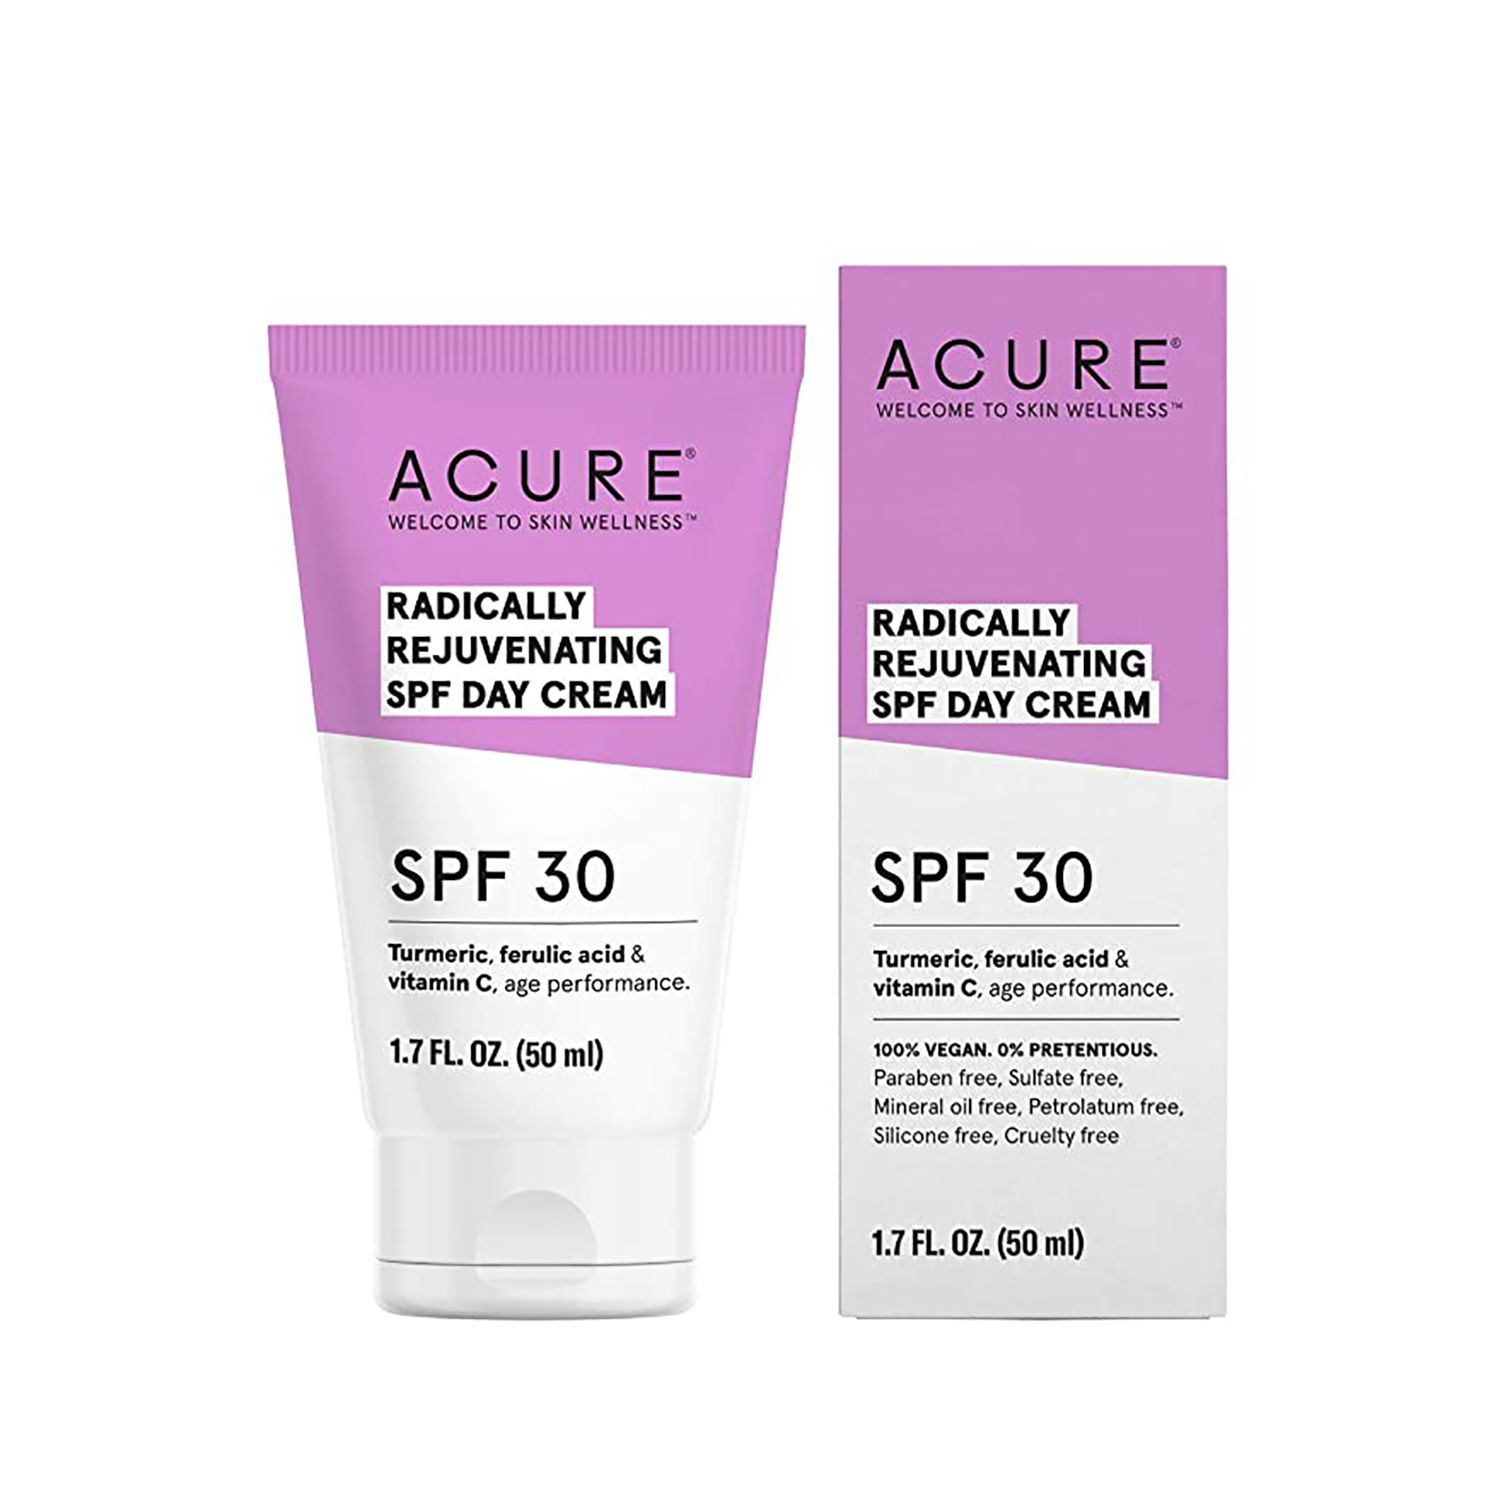 Best Mineral Sunscreen for Face: Acure Radically Rejuvenating SPF 30 Day Cream